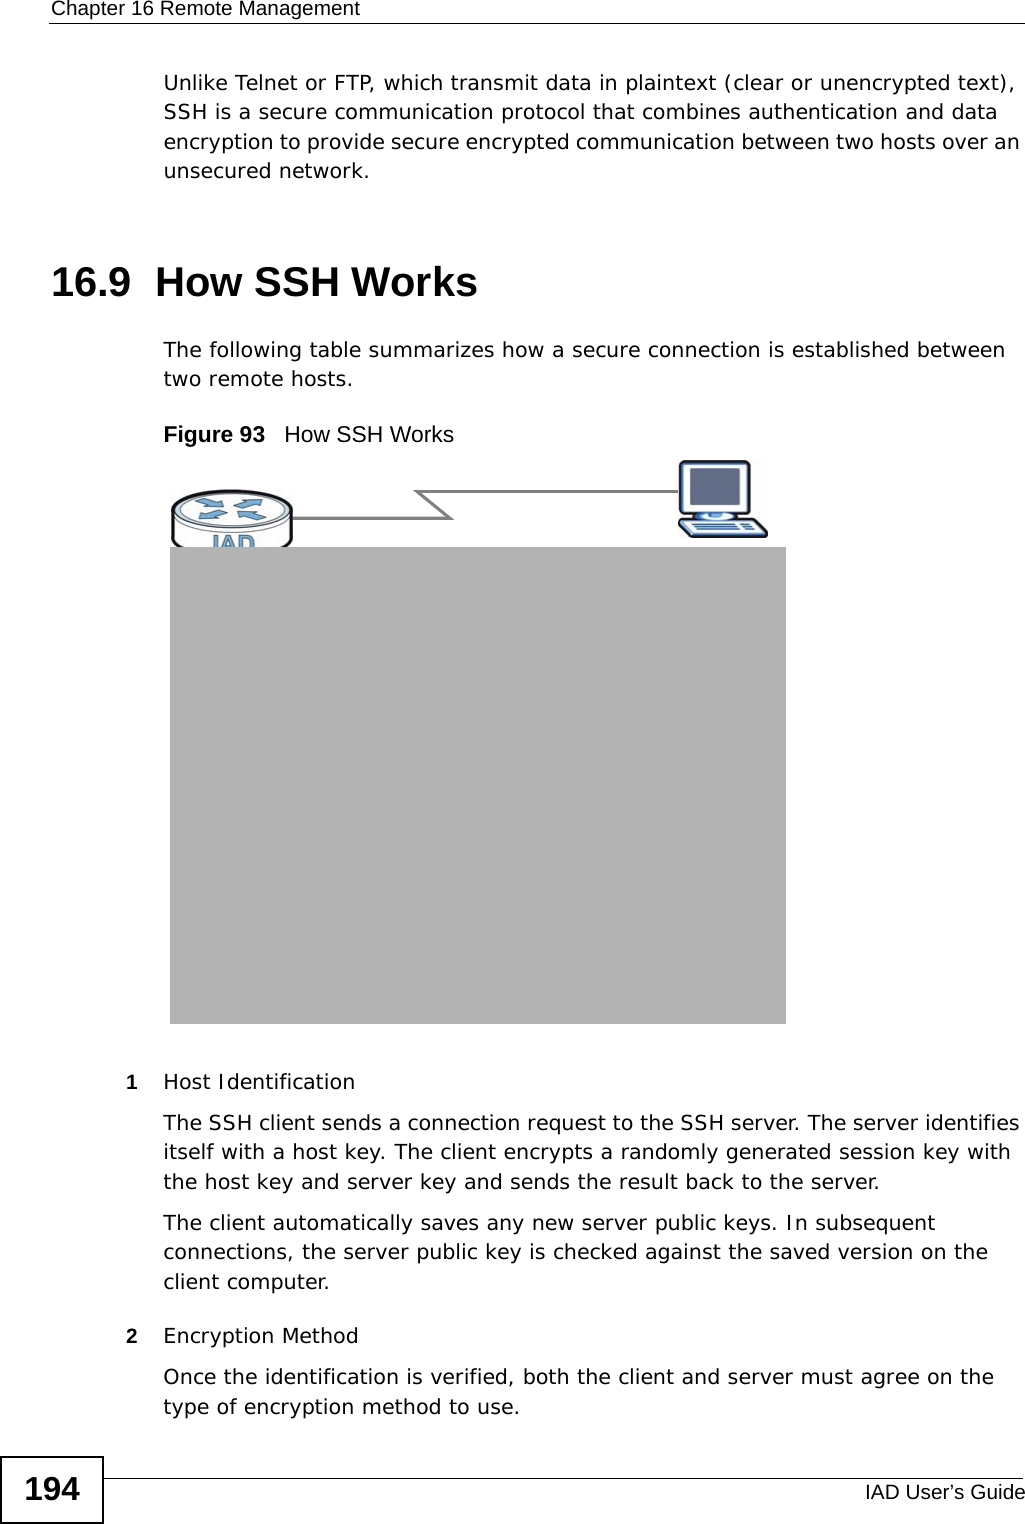 Chapter 16 Remote ManagementIAD User’s Guide194Unlike Telnet or FTP, which transmit data in plaintext (clear or unencrypted text), SSH is a secure communication protocol that combines authentication and data encryption to provide secure encrypted communication between two hosts over an unsecured network. 16.9  How SSH Works  The following table summarizes how a secure connection is established between two remote hosts. Figure 93   How SSH Works1Host IdentificationThe SSH client sends a connection request to the SSH server. The server identifies itself with a host key. The client encrypts a randomly generated session key with the host key and server key and sends the result back to the server. The client automatically saves any new server public keys. In subsequent connections, the server public key is checked against the saved version on the client computer.2Encryption MethodOnce the identification is verified, both the client and server must agree on the type of encryption method to use.